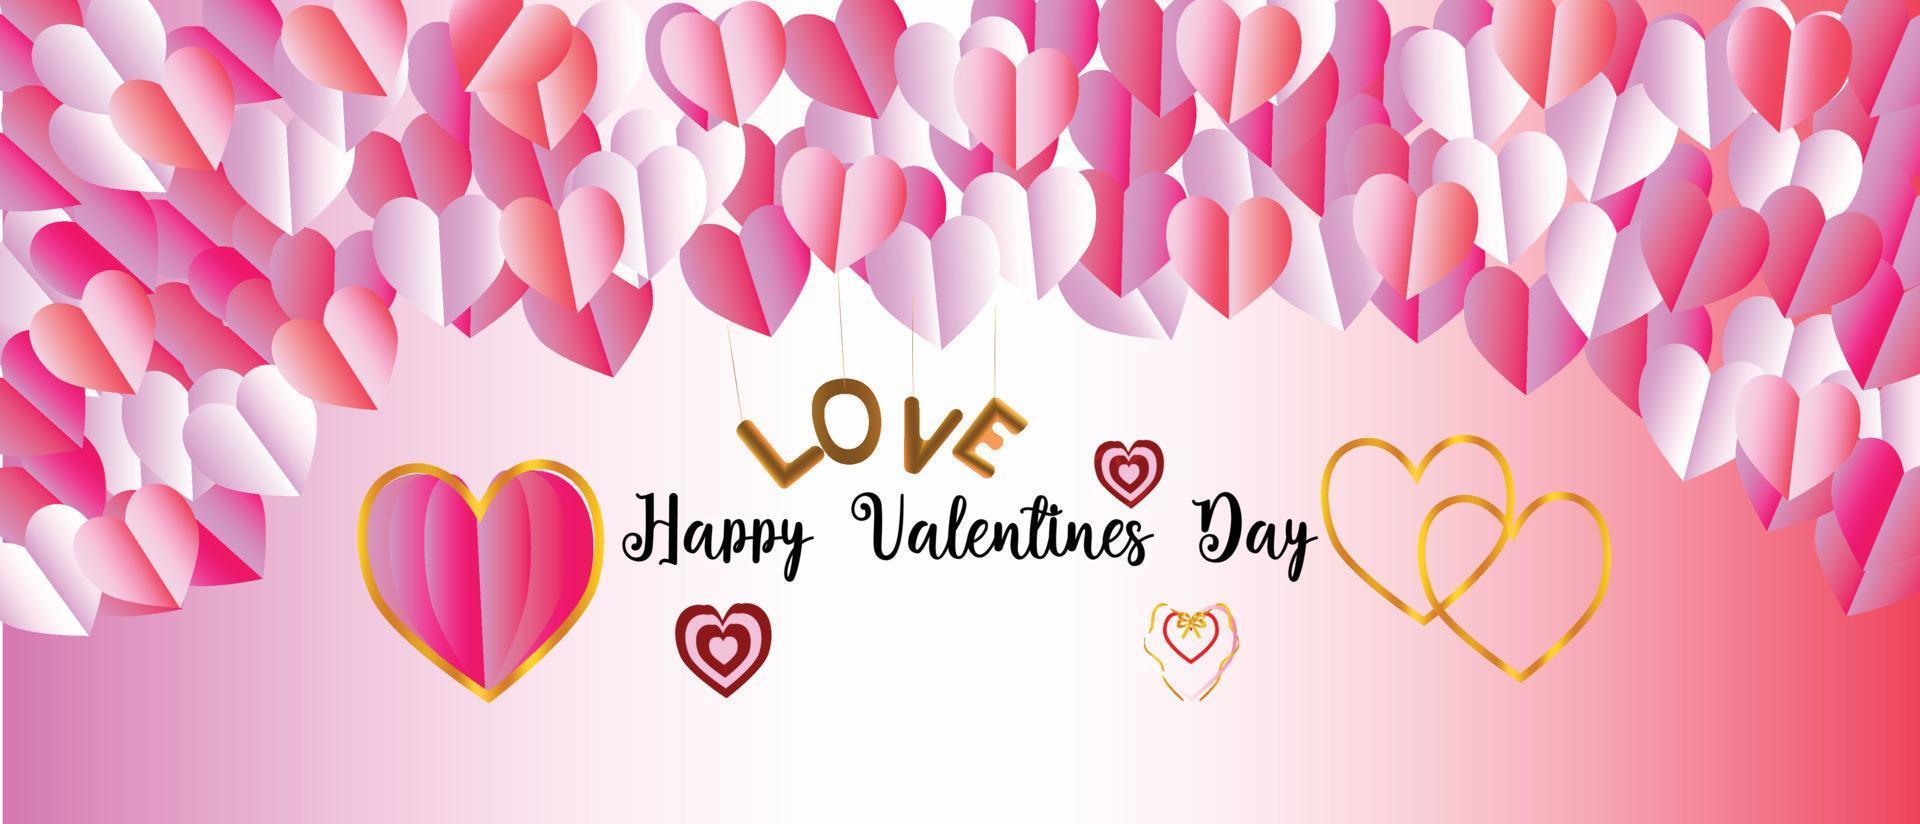 Happy Valentine's Day and love days background with a box of chocolates, gold Valentine's Day card. Happy Father's Day, Happy Mother's Day, Valentine's Day and love days elements vector